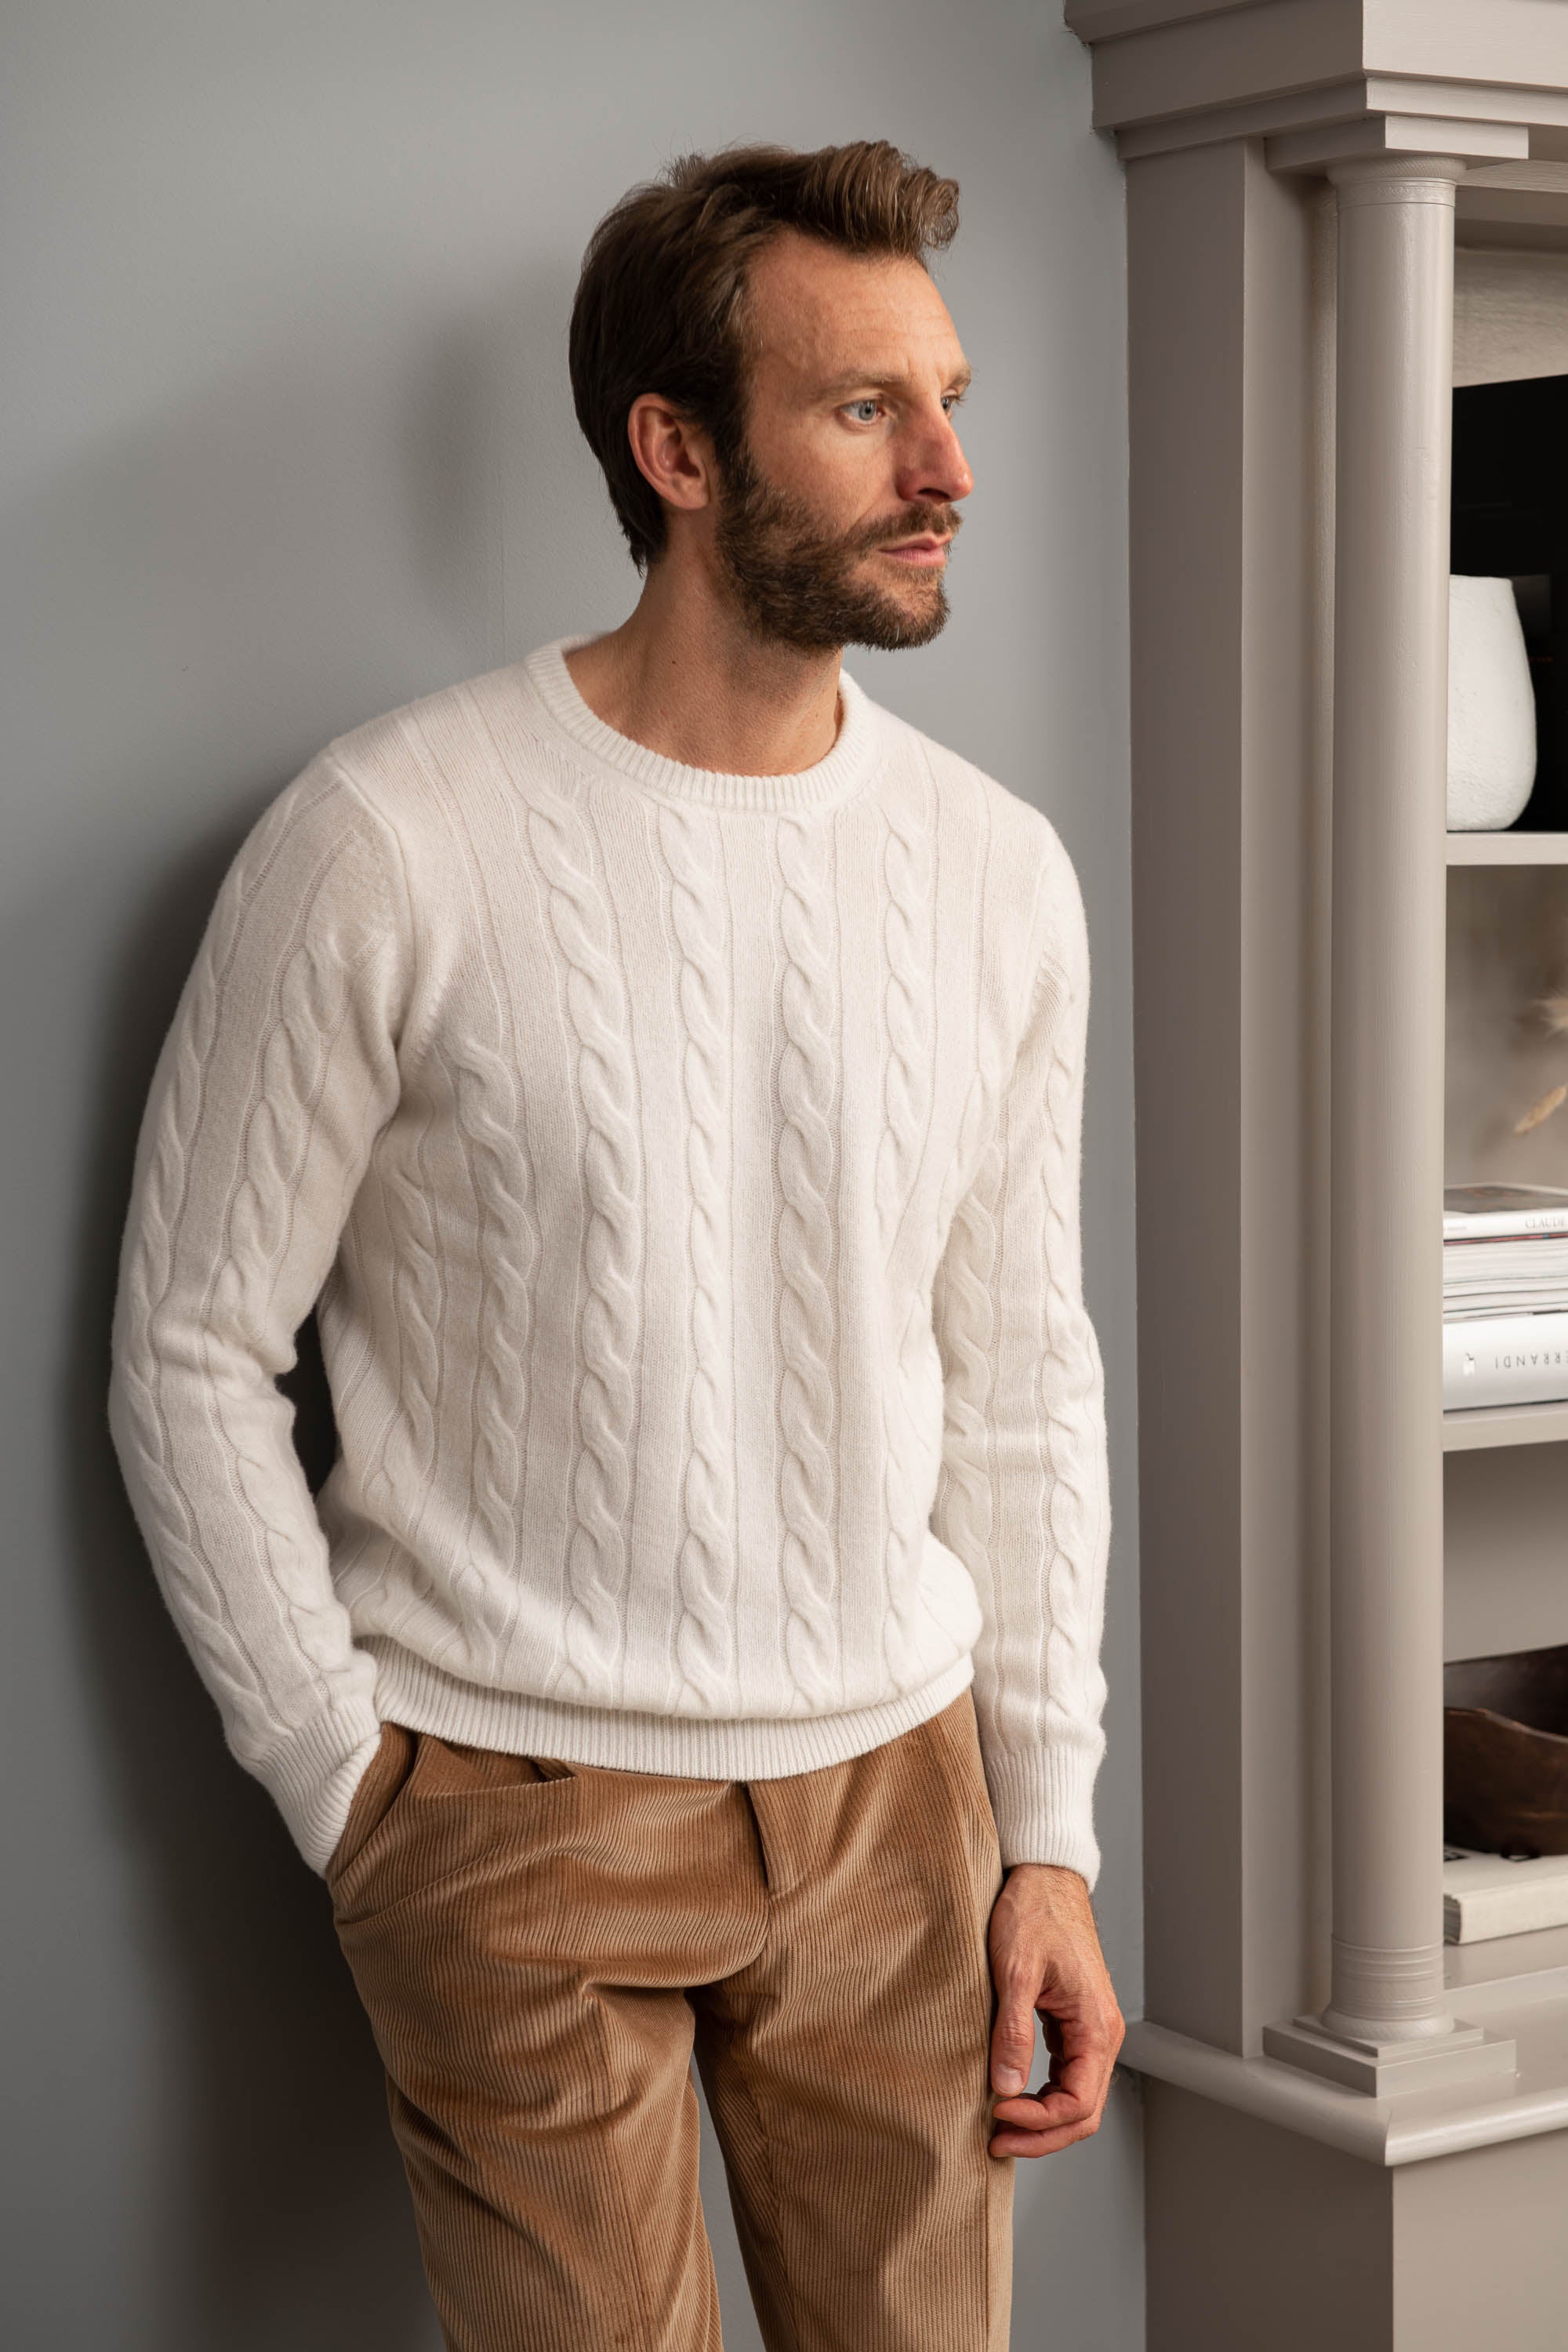 Layering a White Sweater for Transitional Seasons